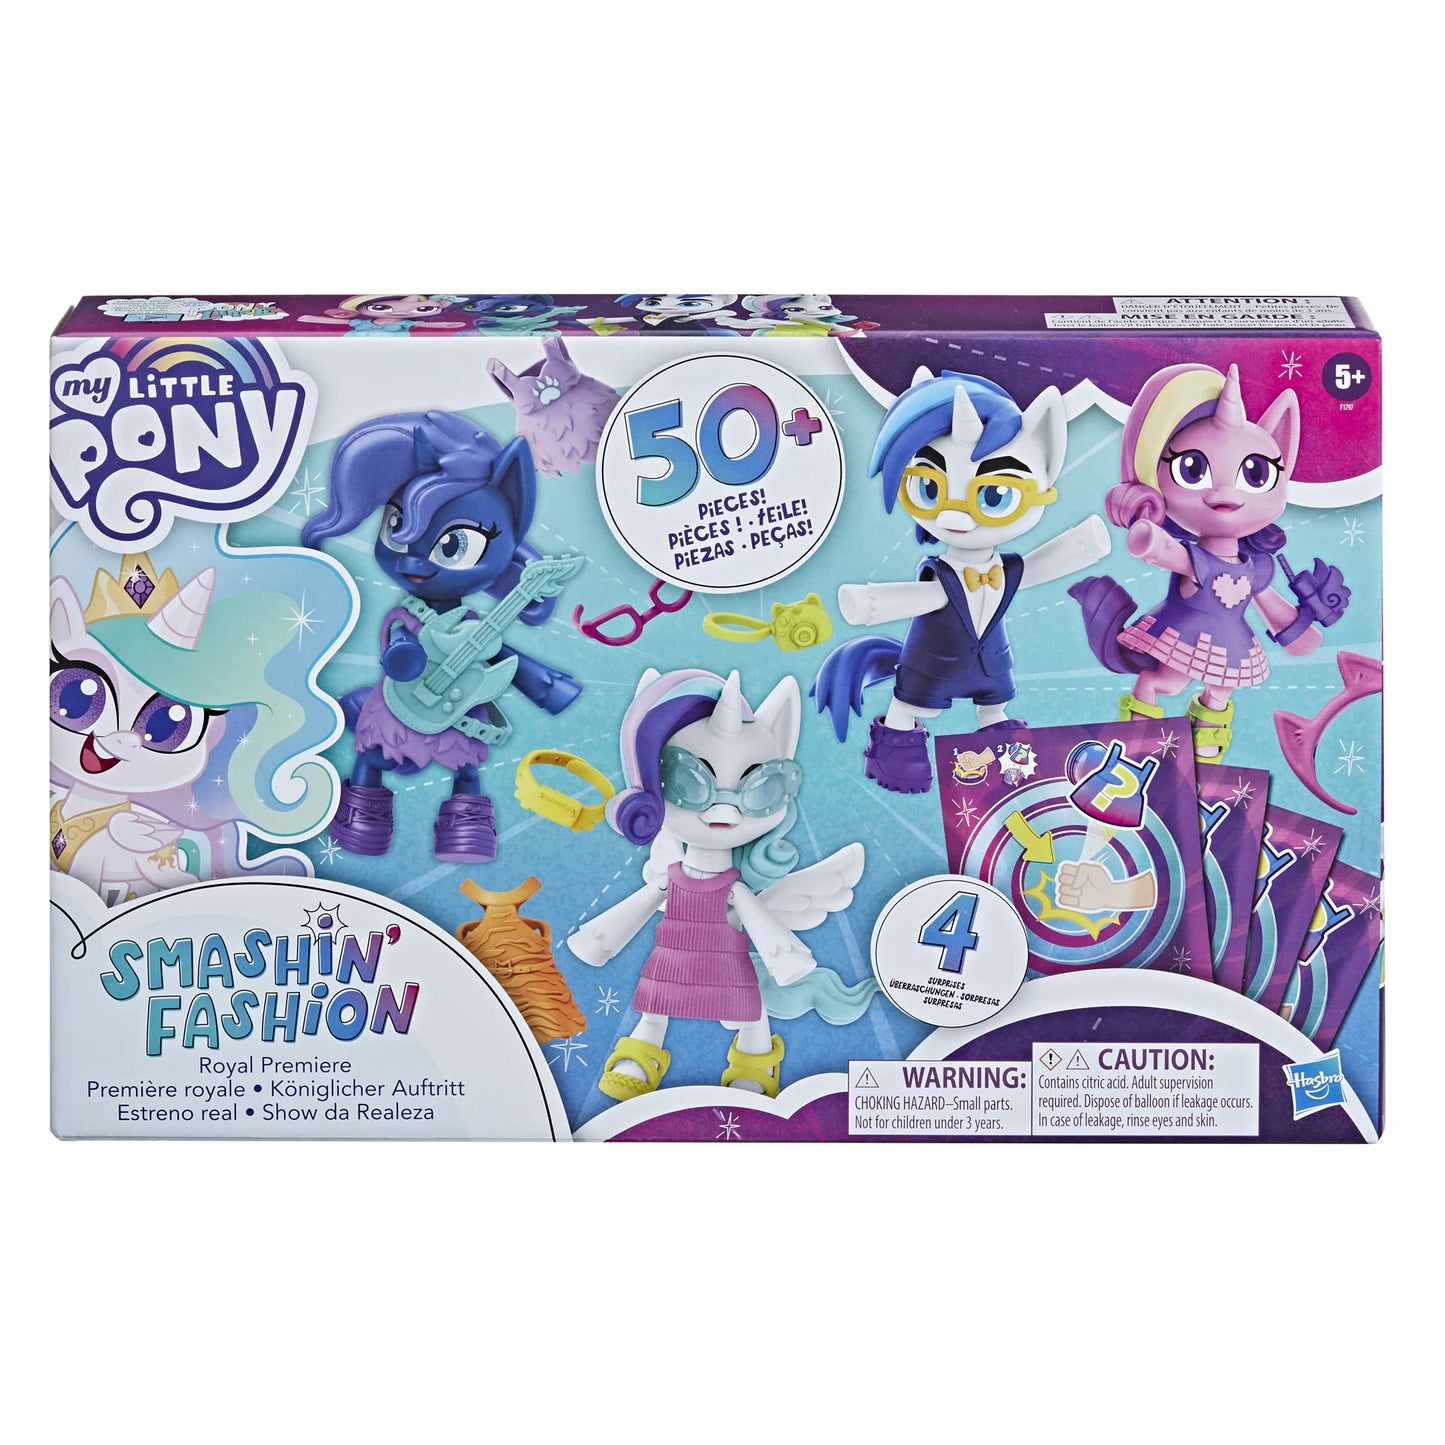 My Little Pony Smashin Fashion Royal Premiere Set -- 50 Pieces, 4 Poseable Figures with Fashion Accessories and Surprise Toy Unboxing